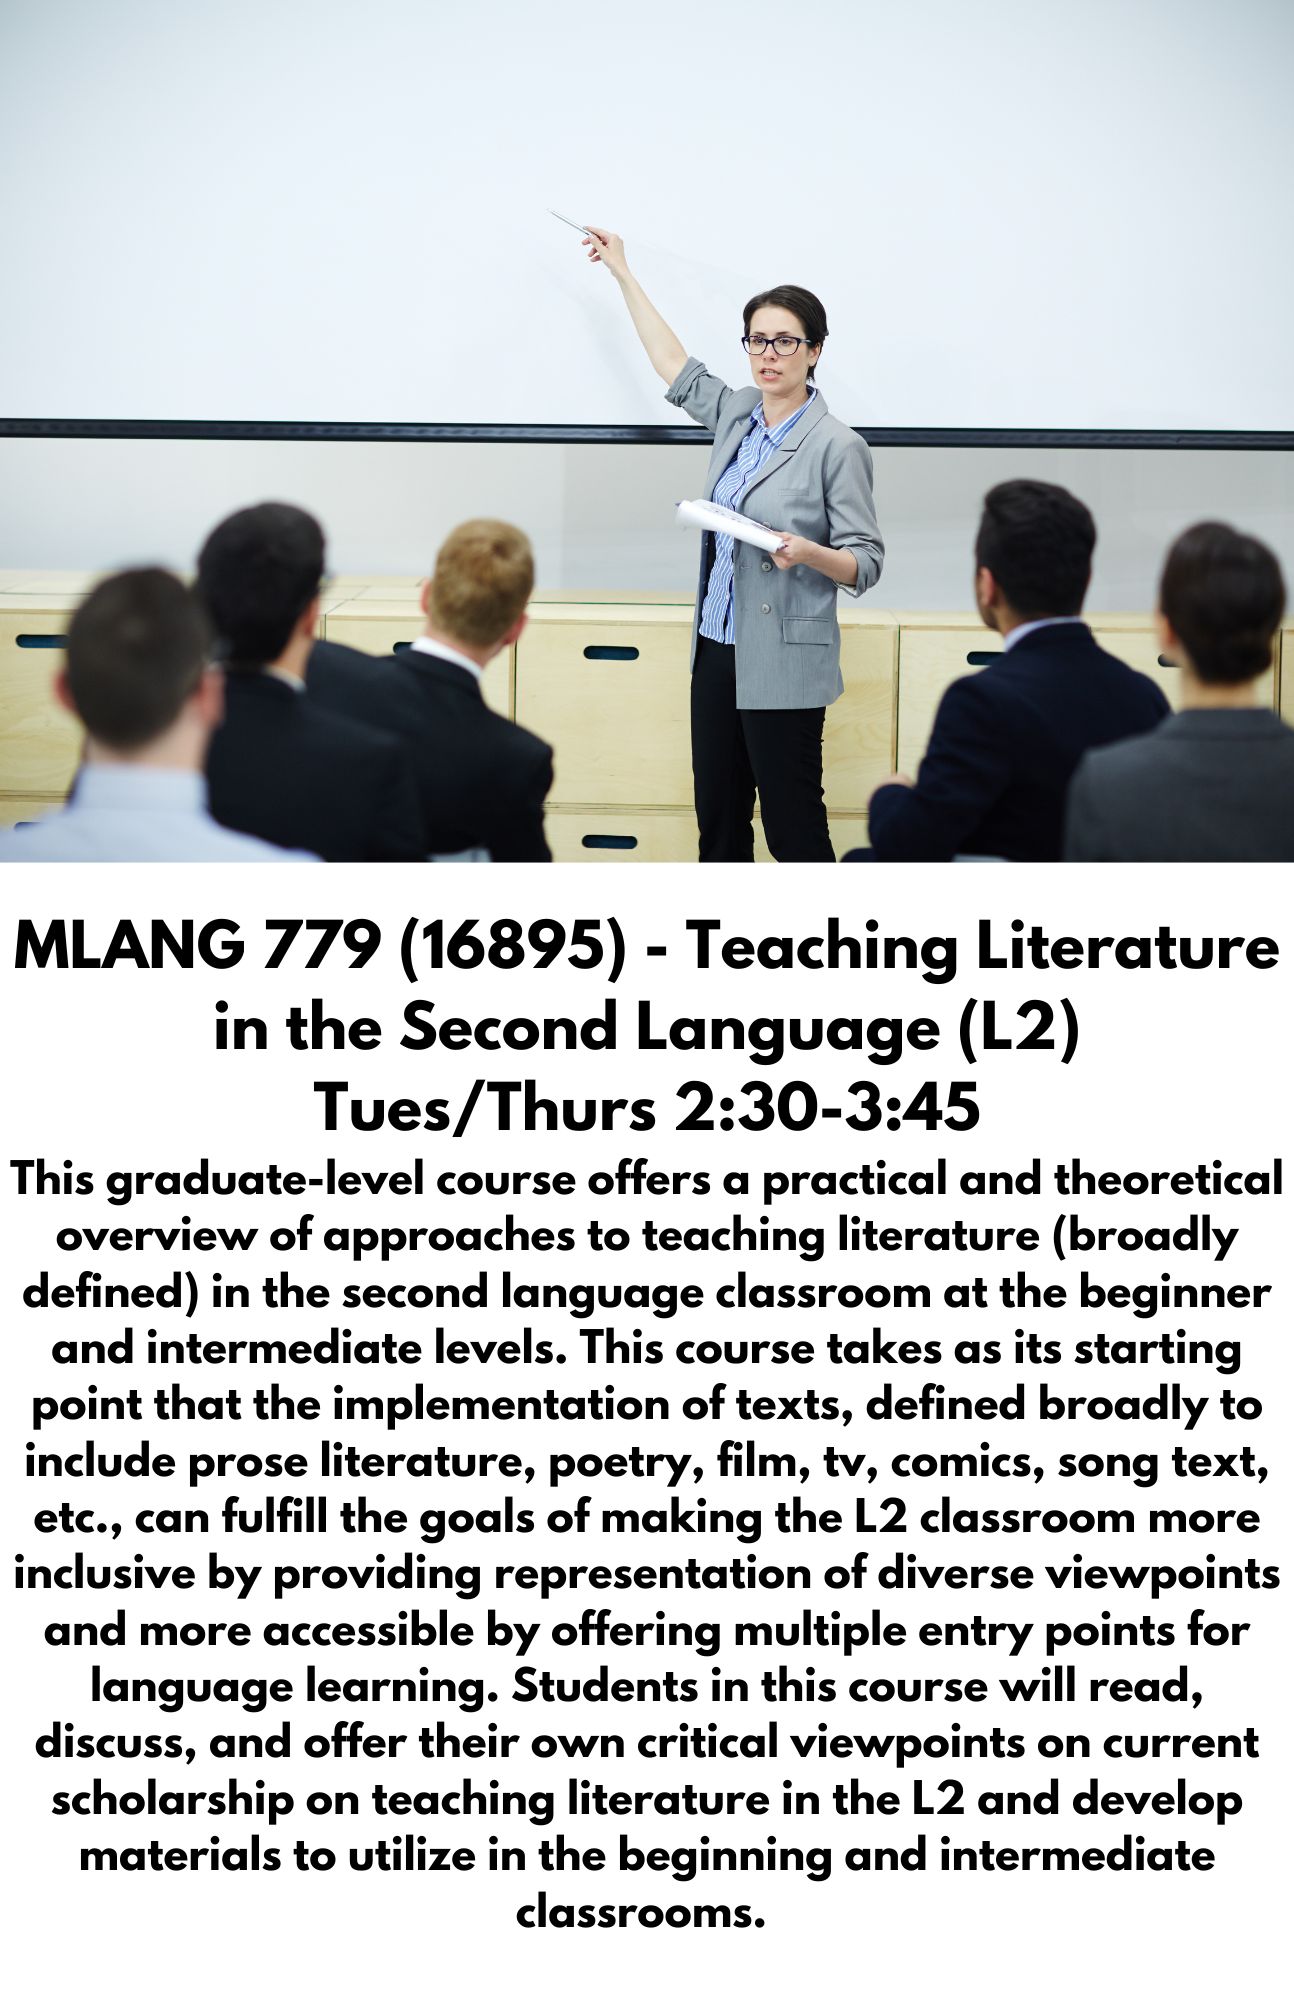 MLANG 779 (16895) - Teaching Literature in the Second Language (L2) Tues/Thurs 2:30-3:45 This graduate-level course offers a practical and theoretical overview of approaches to teaching literature (broadly defined) in the second language classroom at the beginner and intermediate levels. This course takes as its starting point that the implementation of texts, defined broadly to include prose literature, poetry, film, tv, comics, song text, etc., can fulfill the goals of making the L2 classroom more inclusive by providing representation of diverse viewpoints and more accessible by offering multiple entry points for language learning. Students in this course will read, discuss, and offer their own critical viewpoints on current scholarship on teaching literature in the L2 and develop materials to utilize in the beginning and intermediate classrooms.